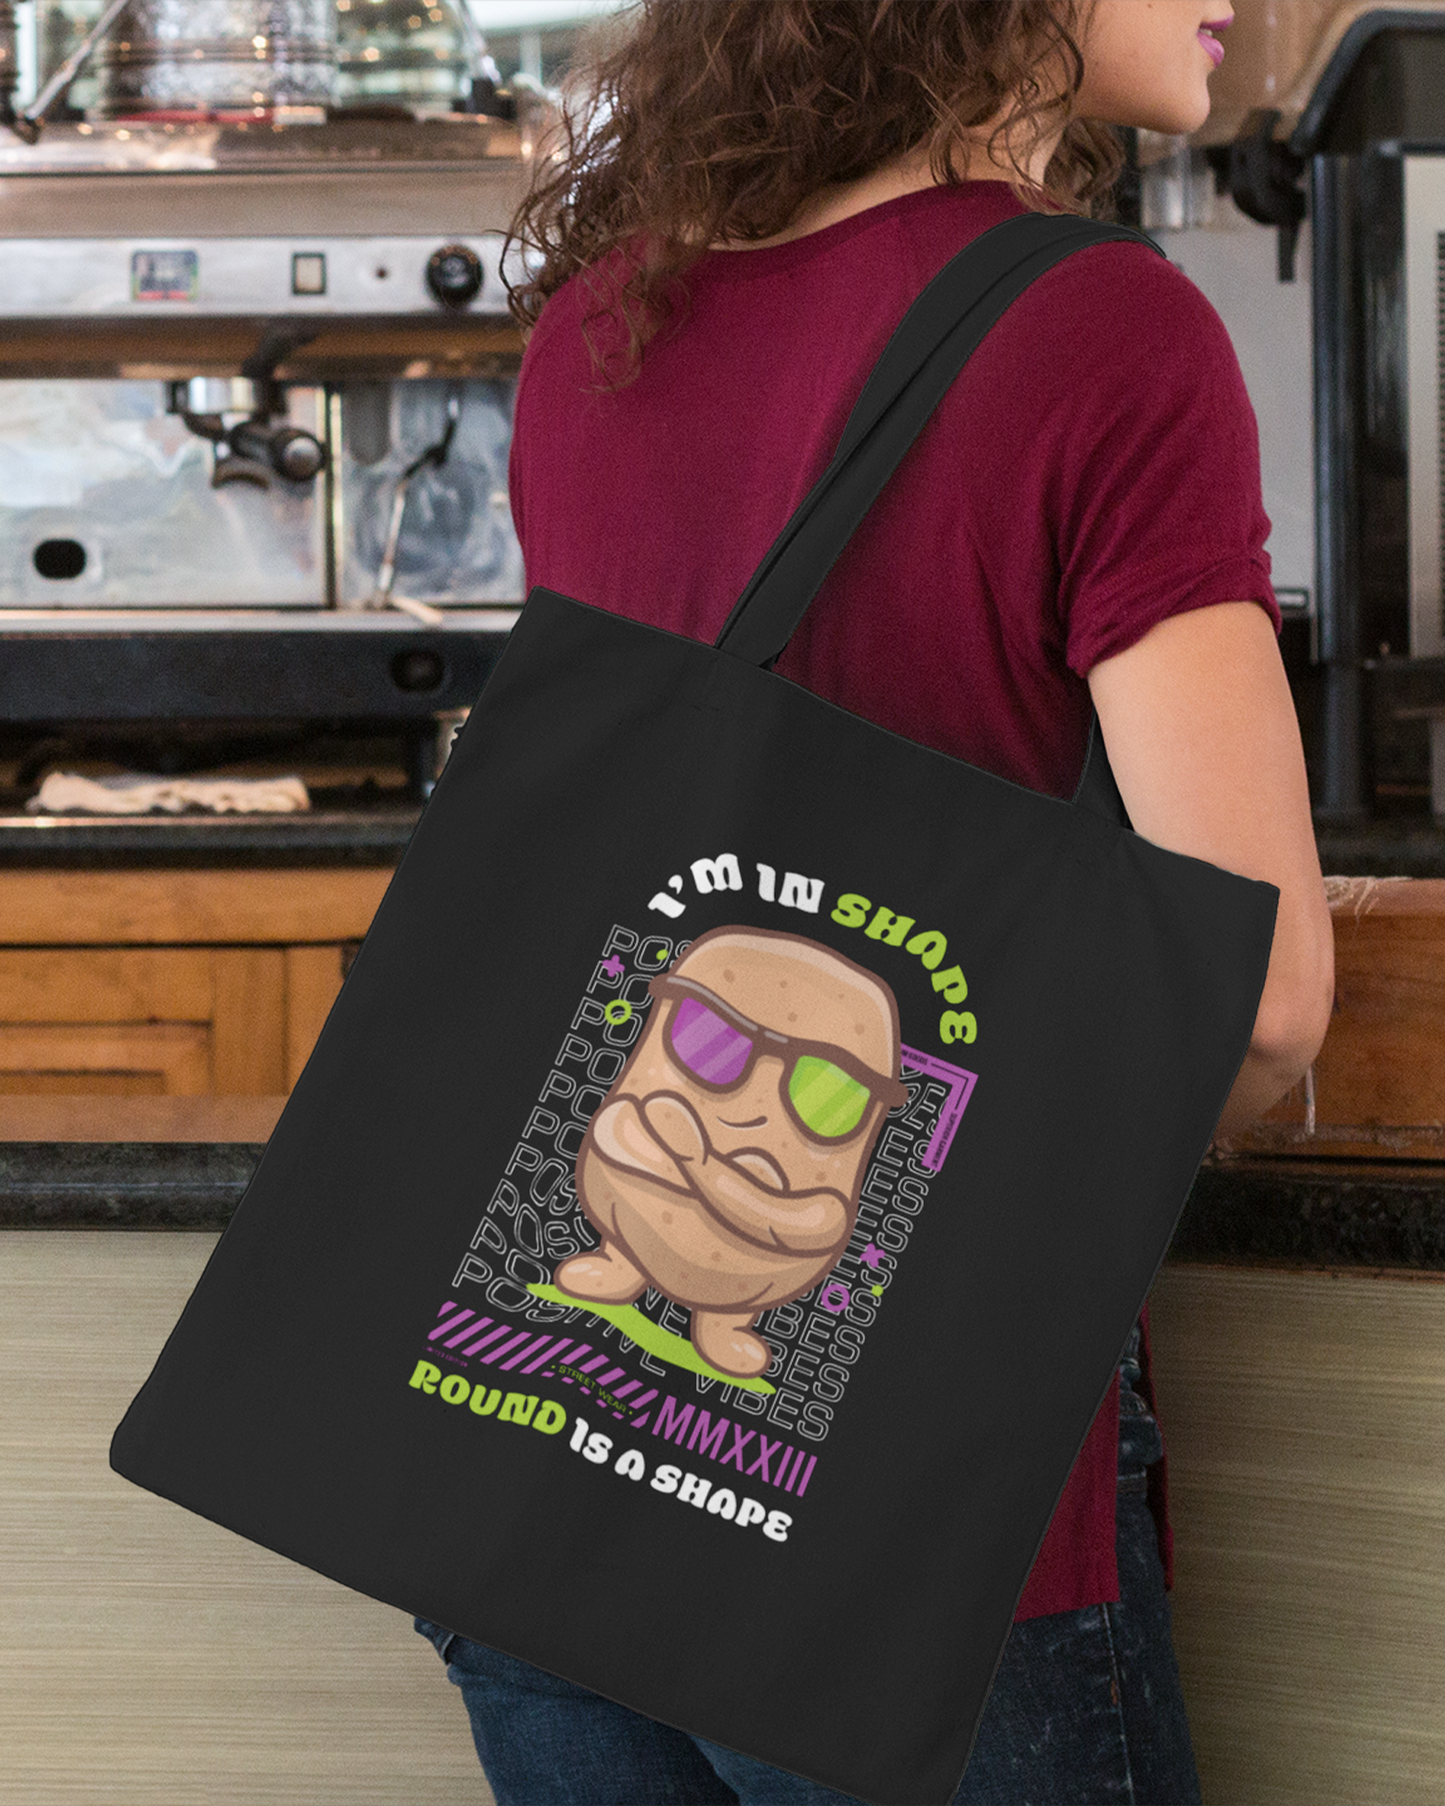 I Am In Shape Round Is A Shape Tote Bag